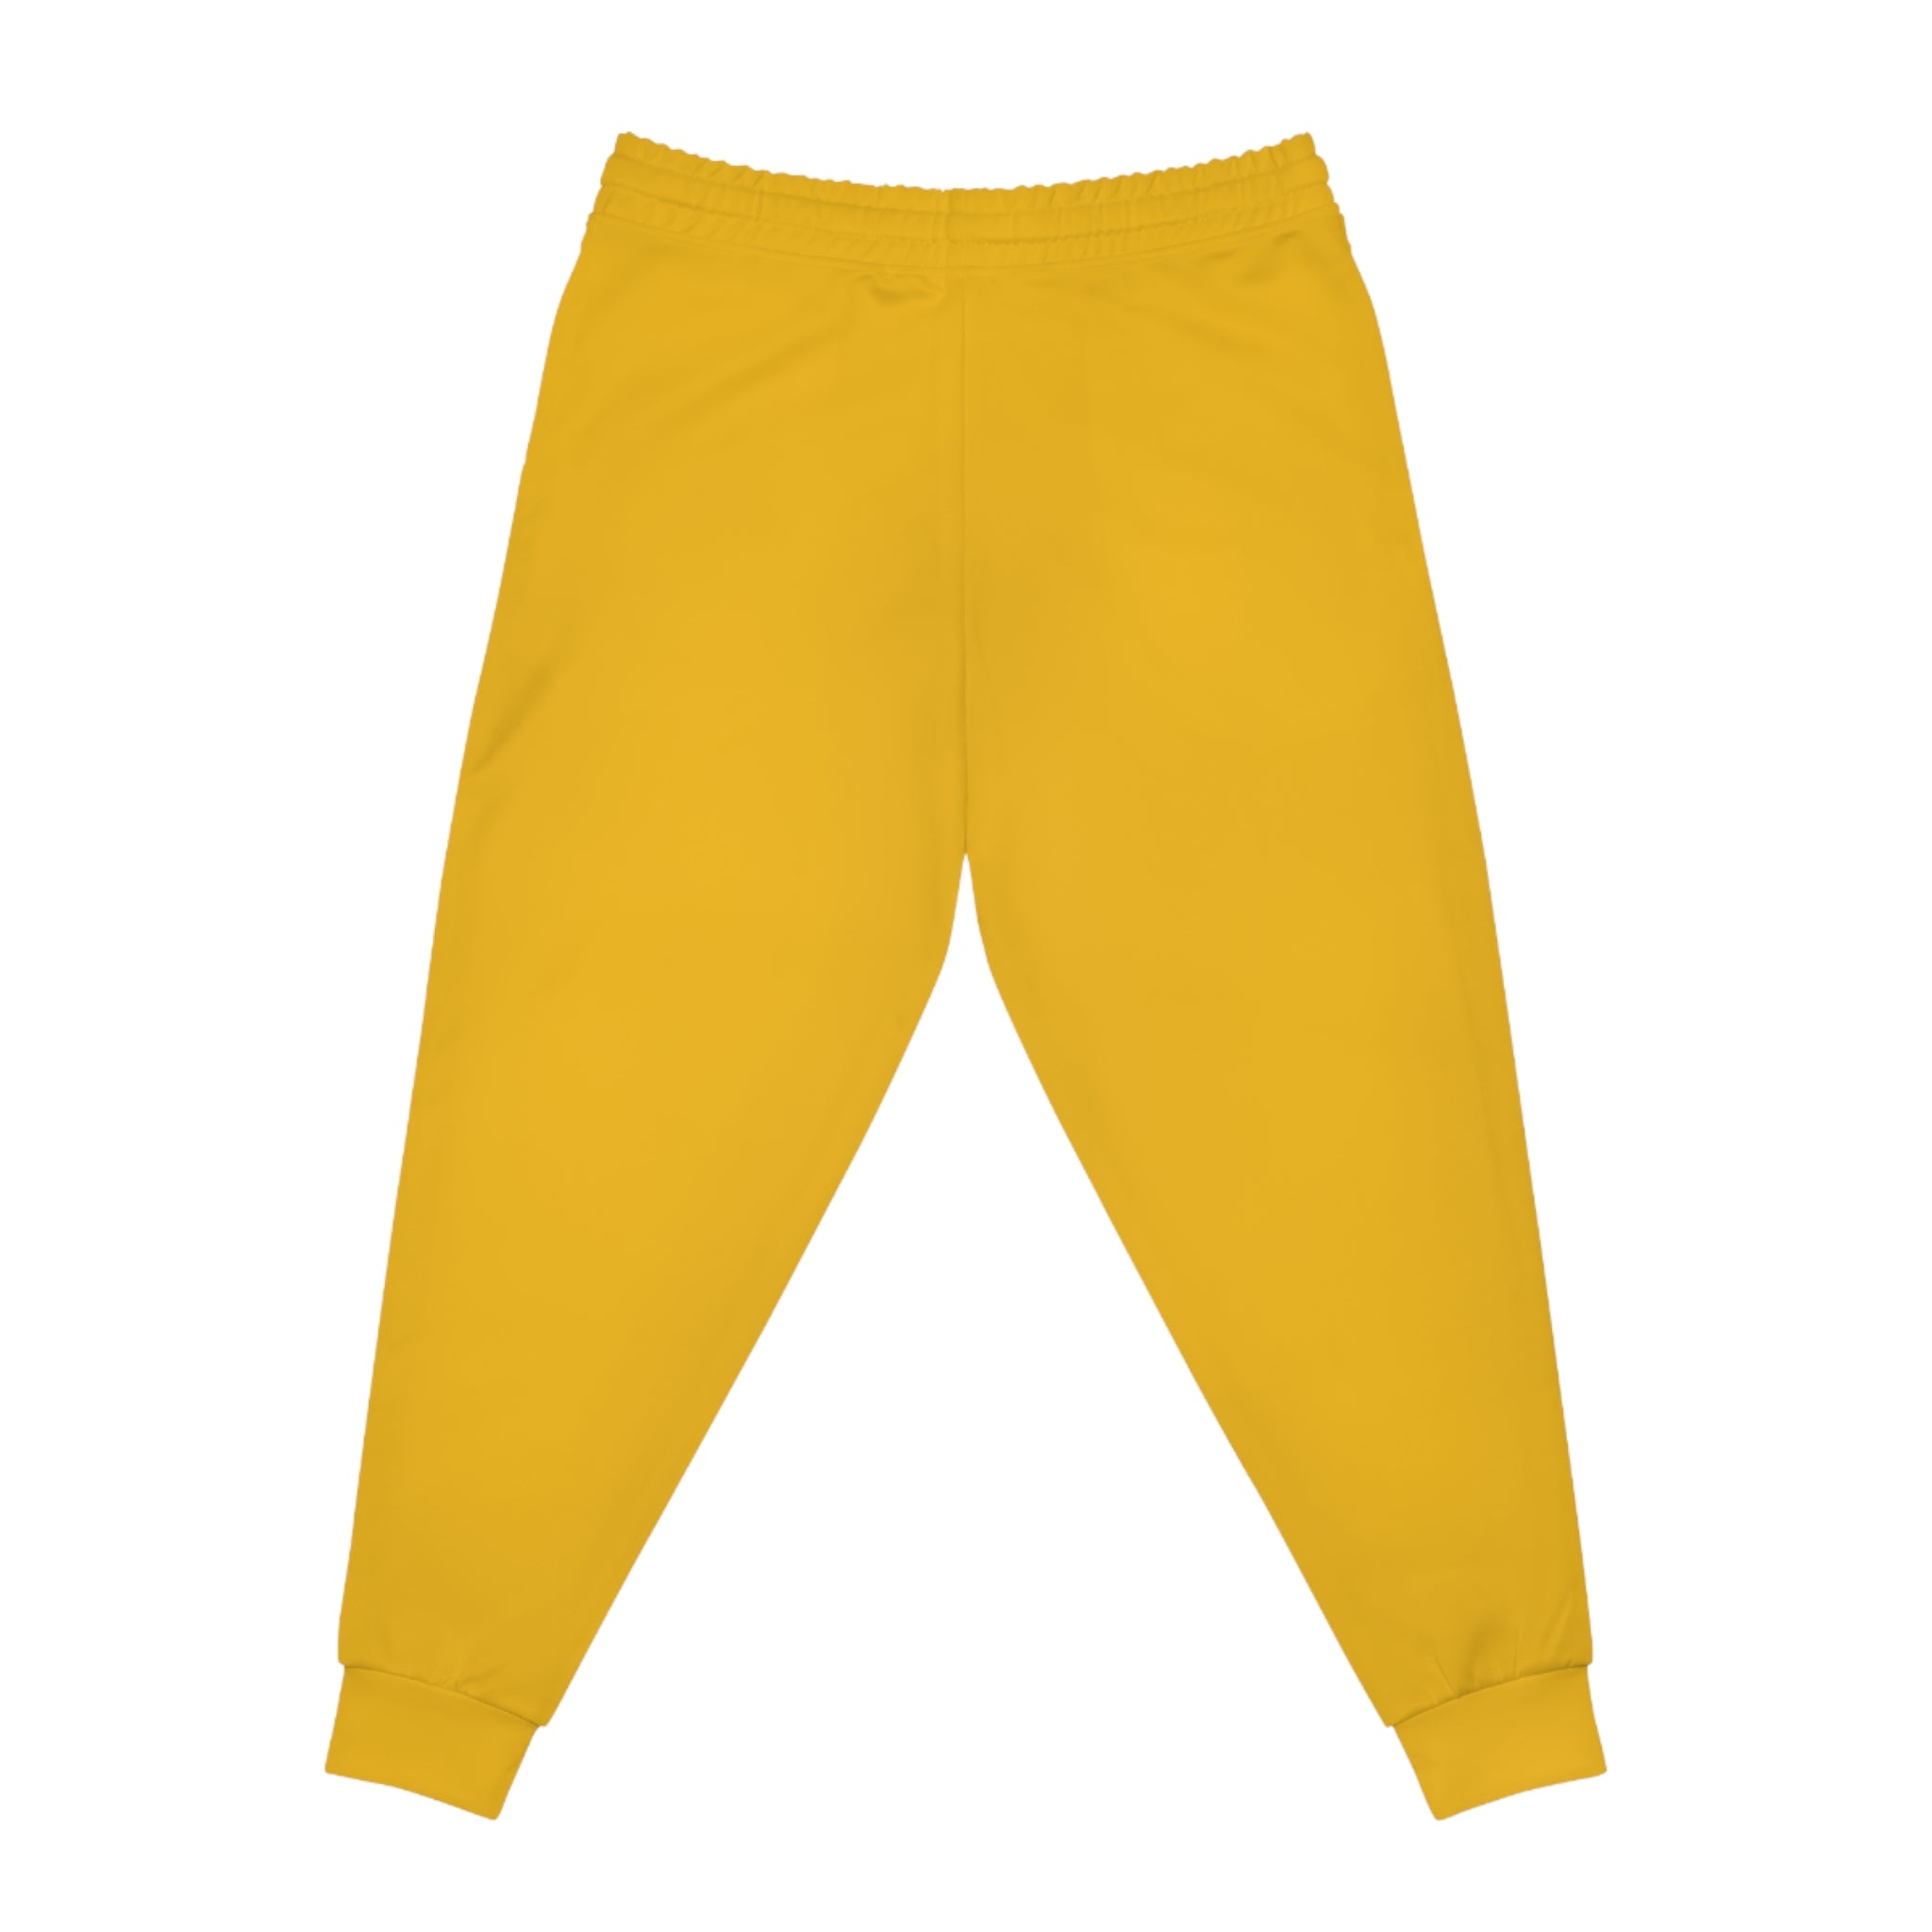 CombinedMinds Athletic Joggers Yellow/White Logo